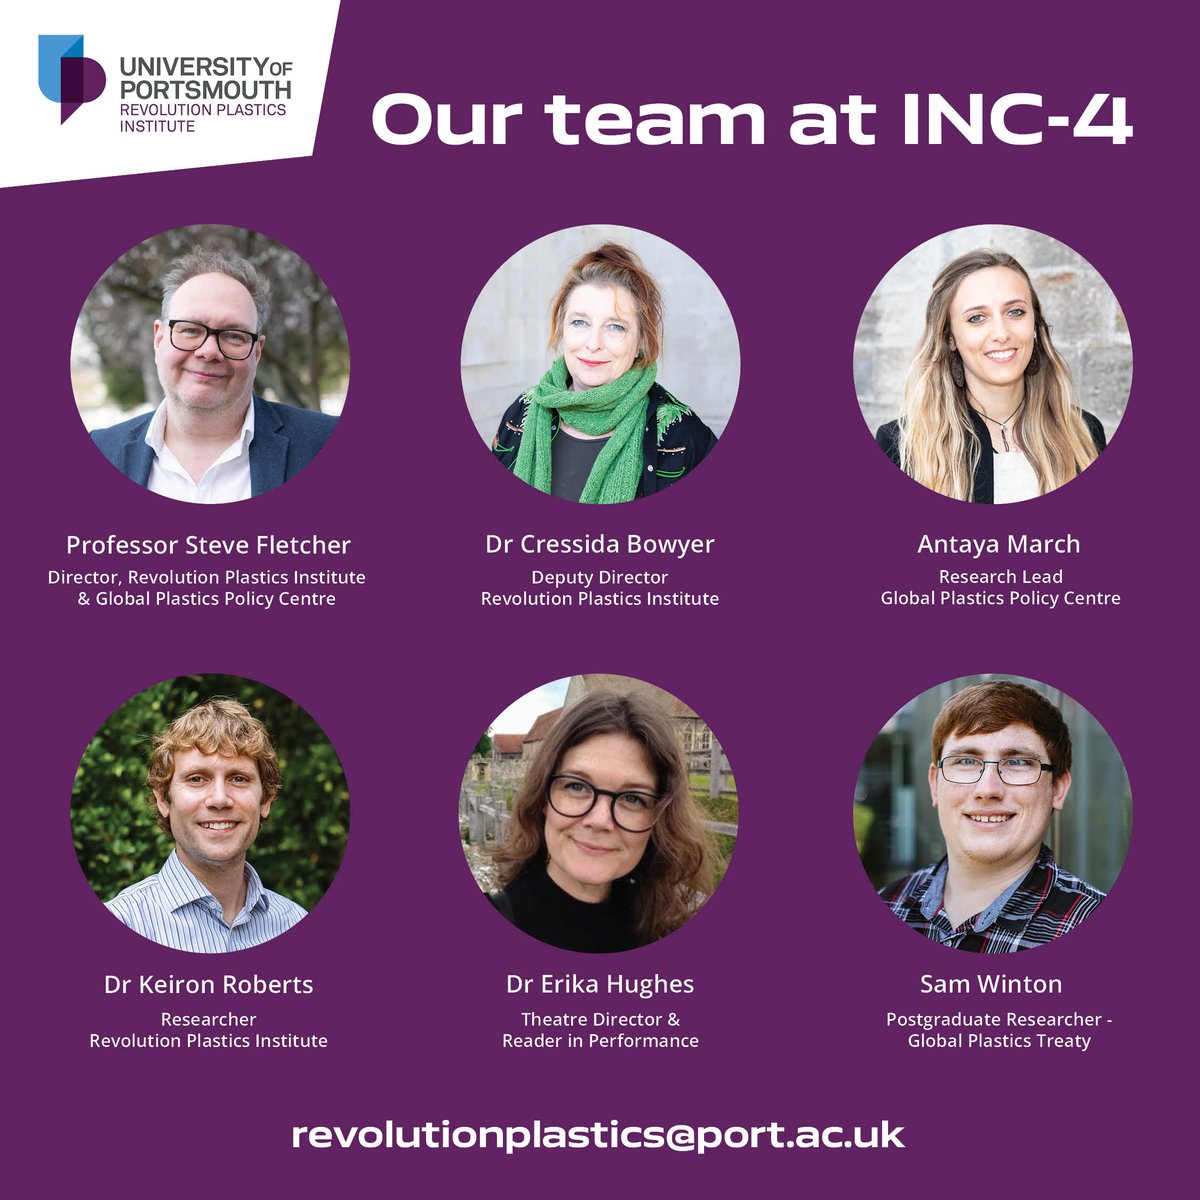 Throughout #INC4 of the #PlasticsTreaty, our team is available for expert comment or interview. Talking points include: 🌍 National and regional policy ✅ Barriers and enablers of policy effectiveness ⚖️ A just transition 🧑‍🤝‍🧑 Community engagement ♻️ Resource and waste management